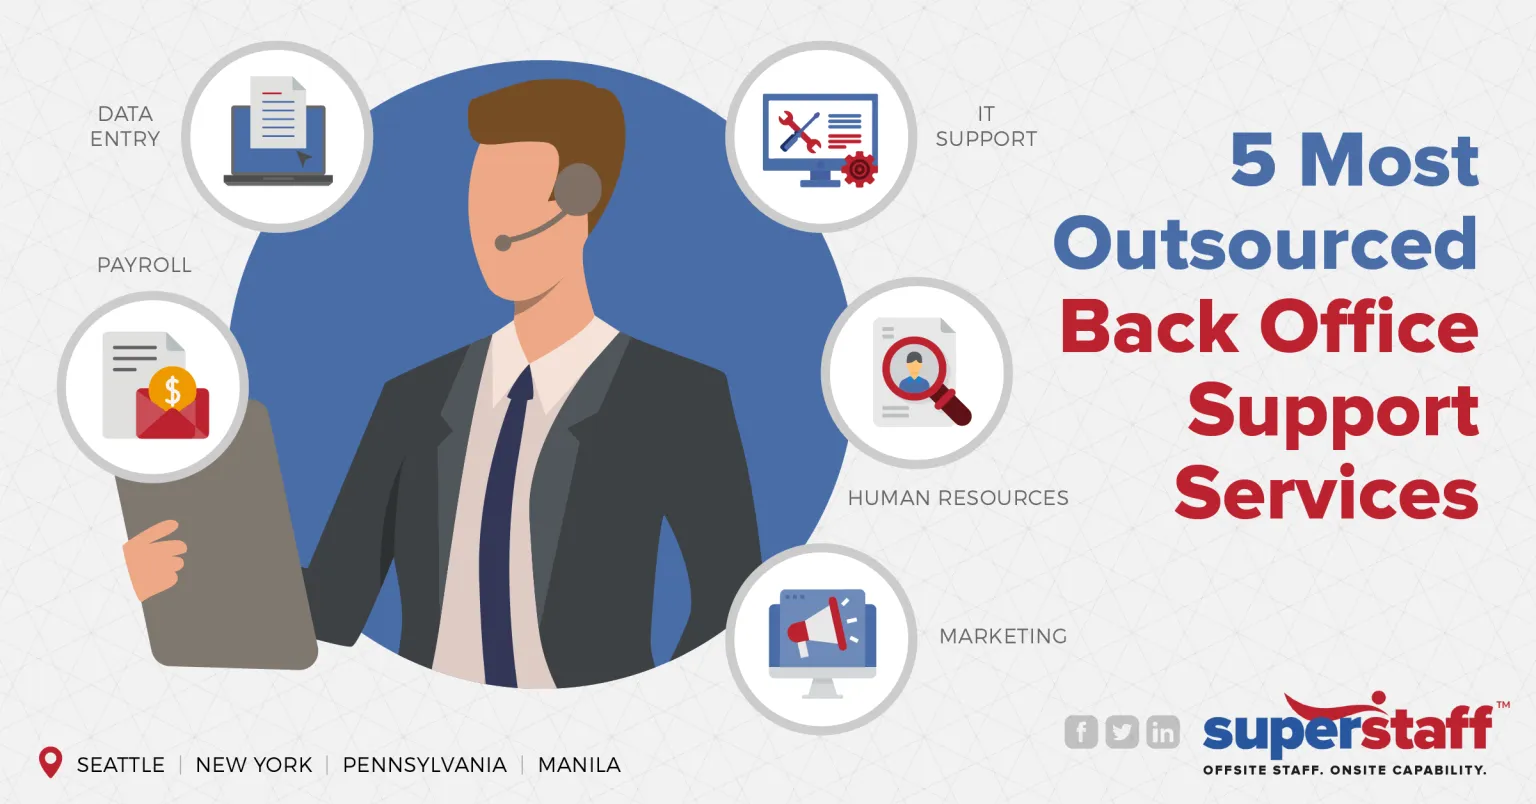 Outsourced Back Office Support Services